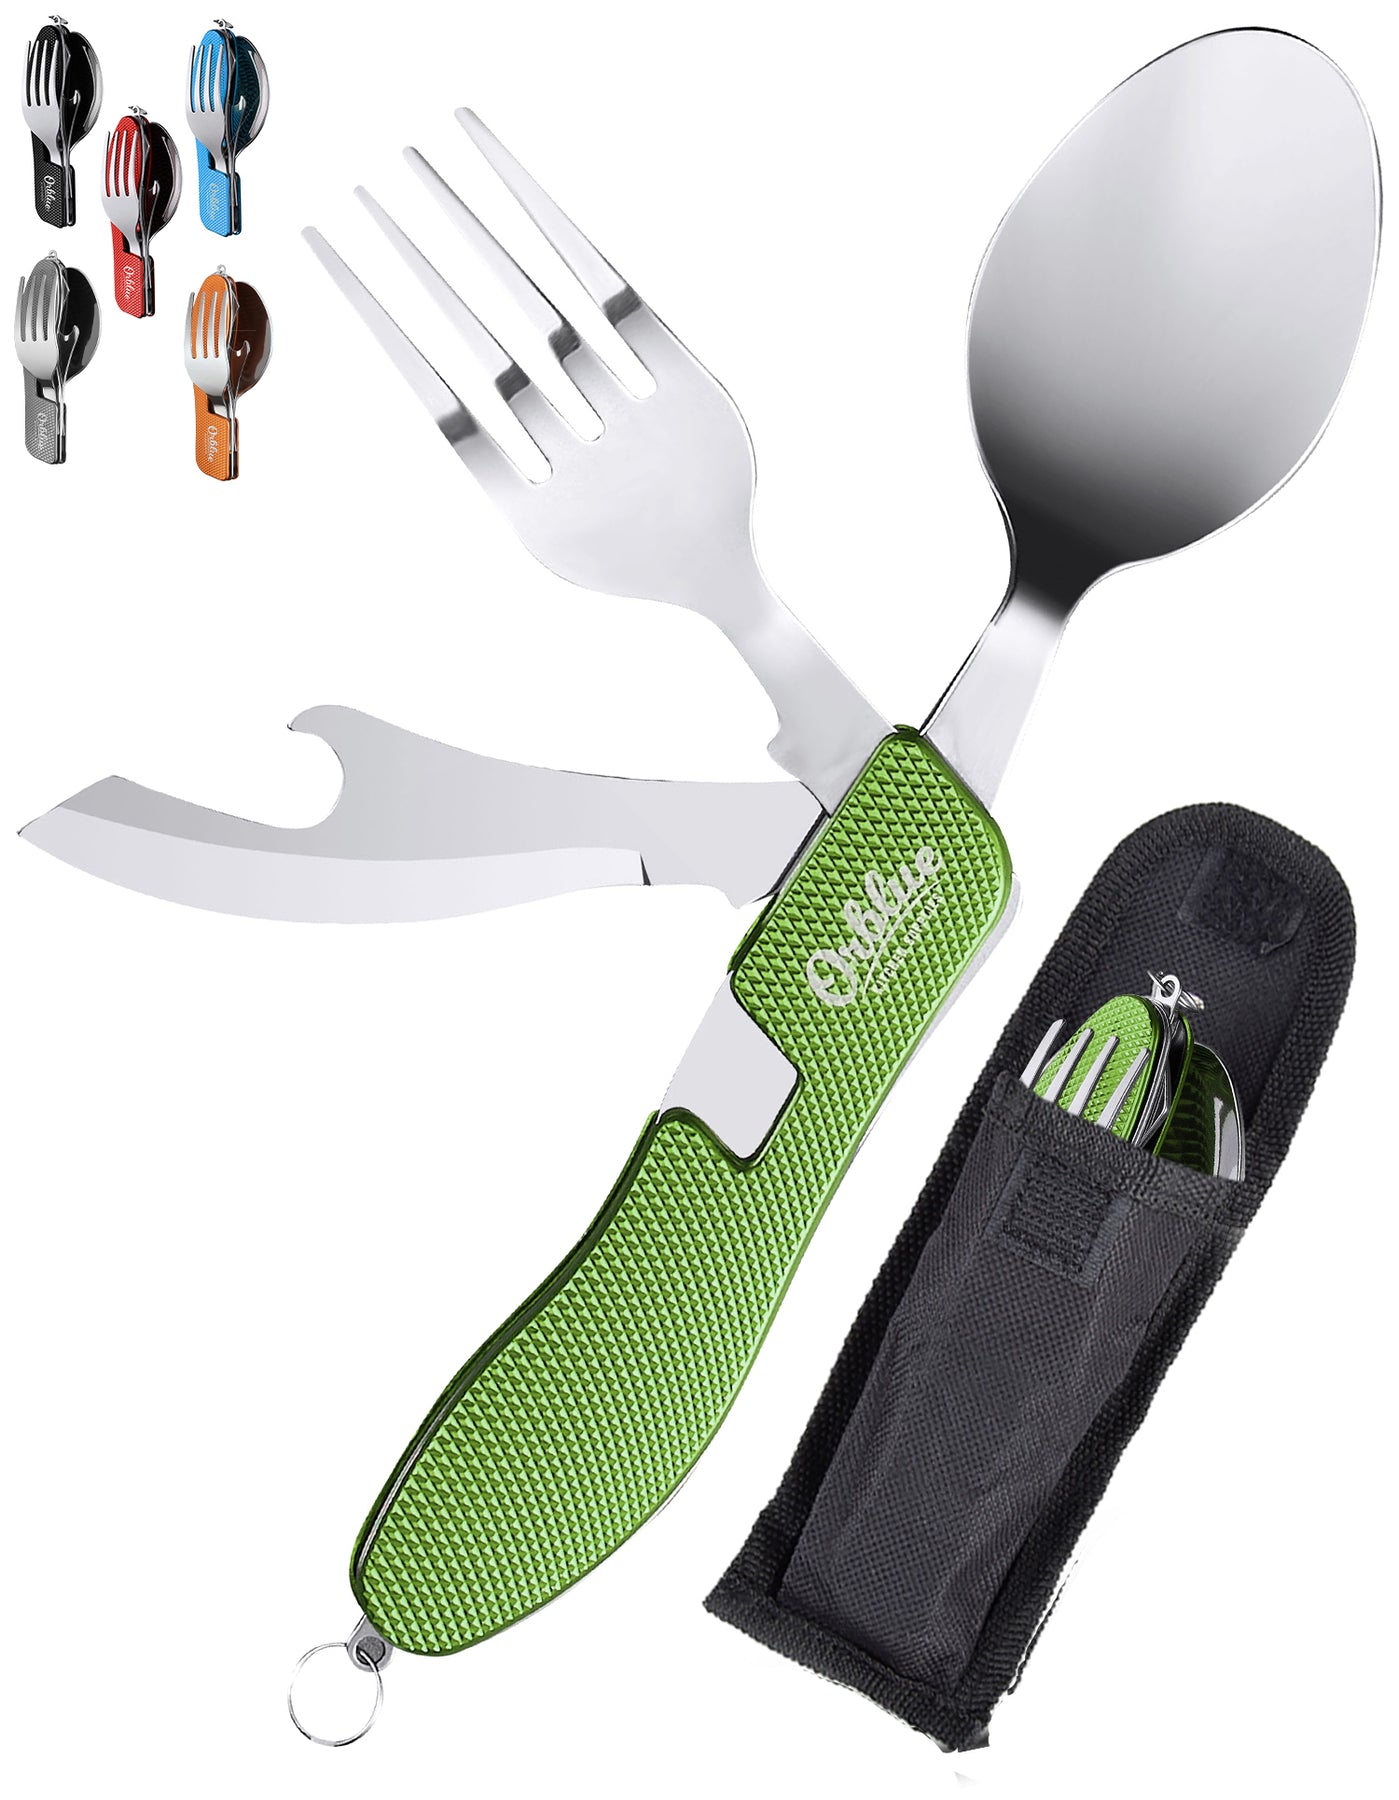 4 Sets Outdoor Eating Utensils 3in1 Fork Knife Spoon Stainless